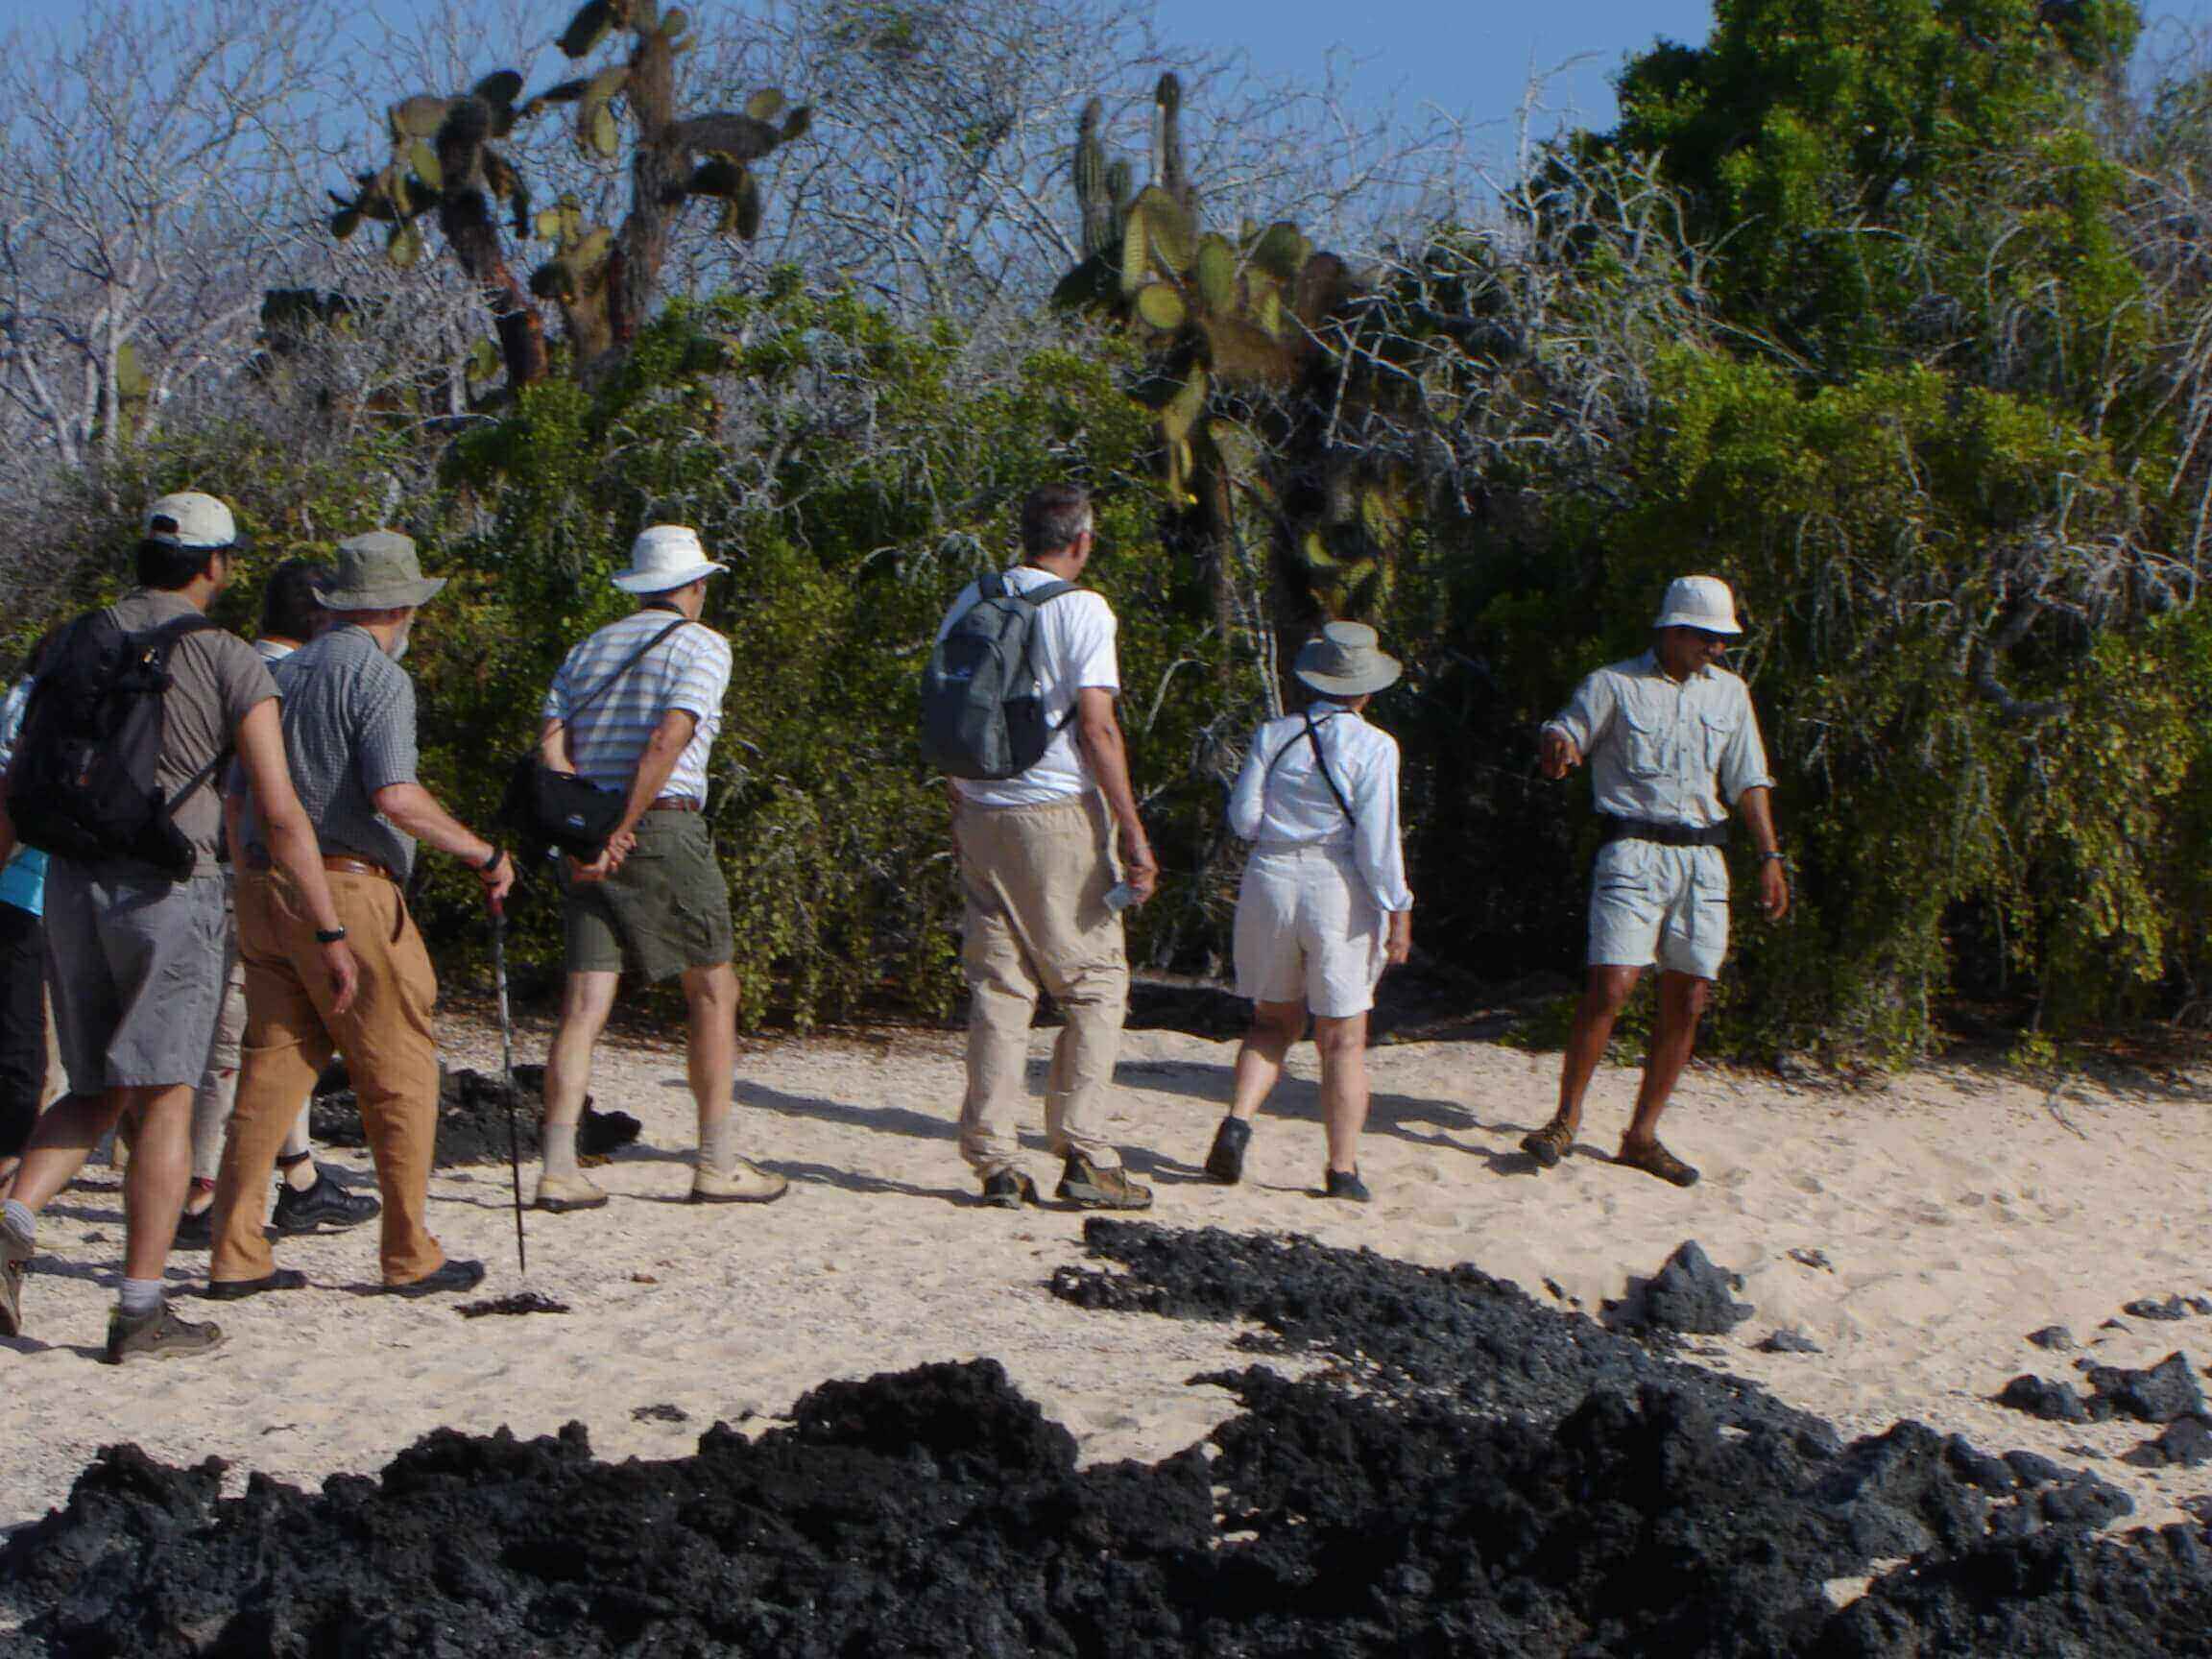 Hiking in the Galapagos islands